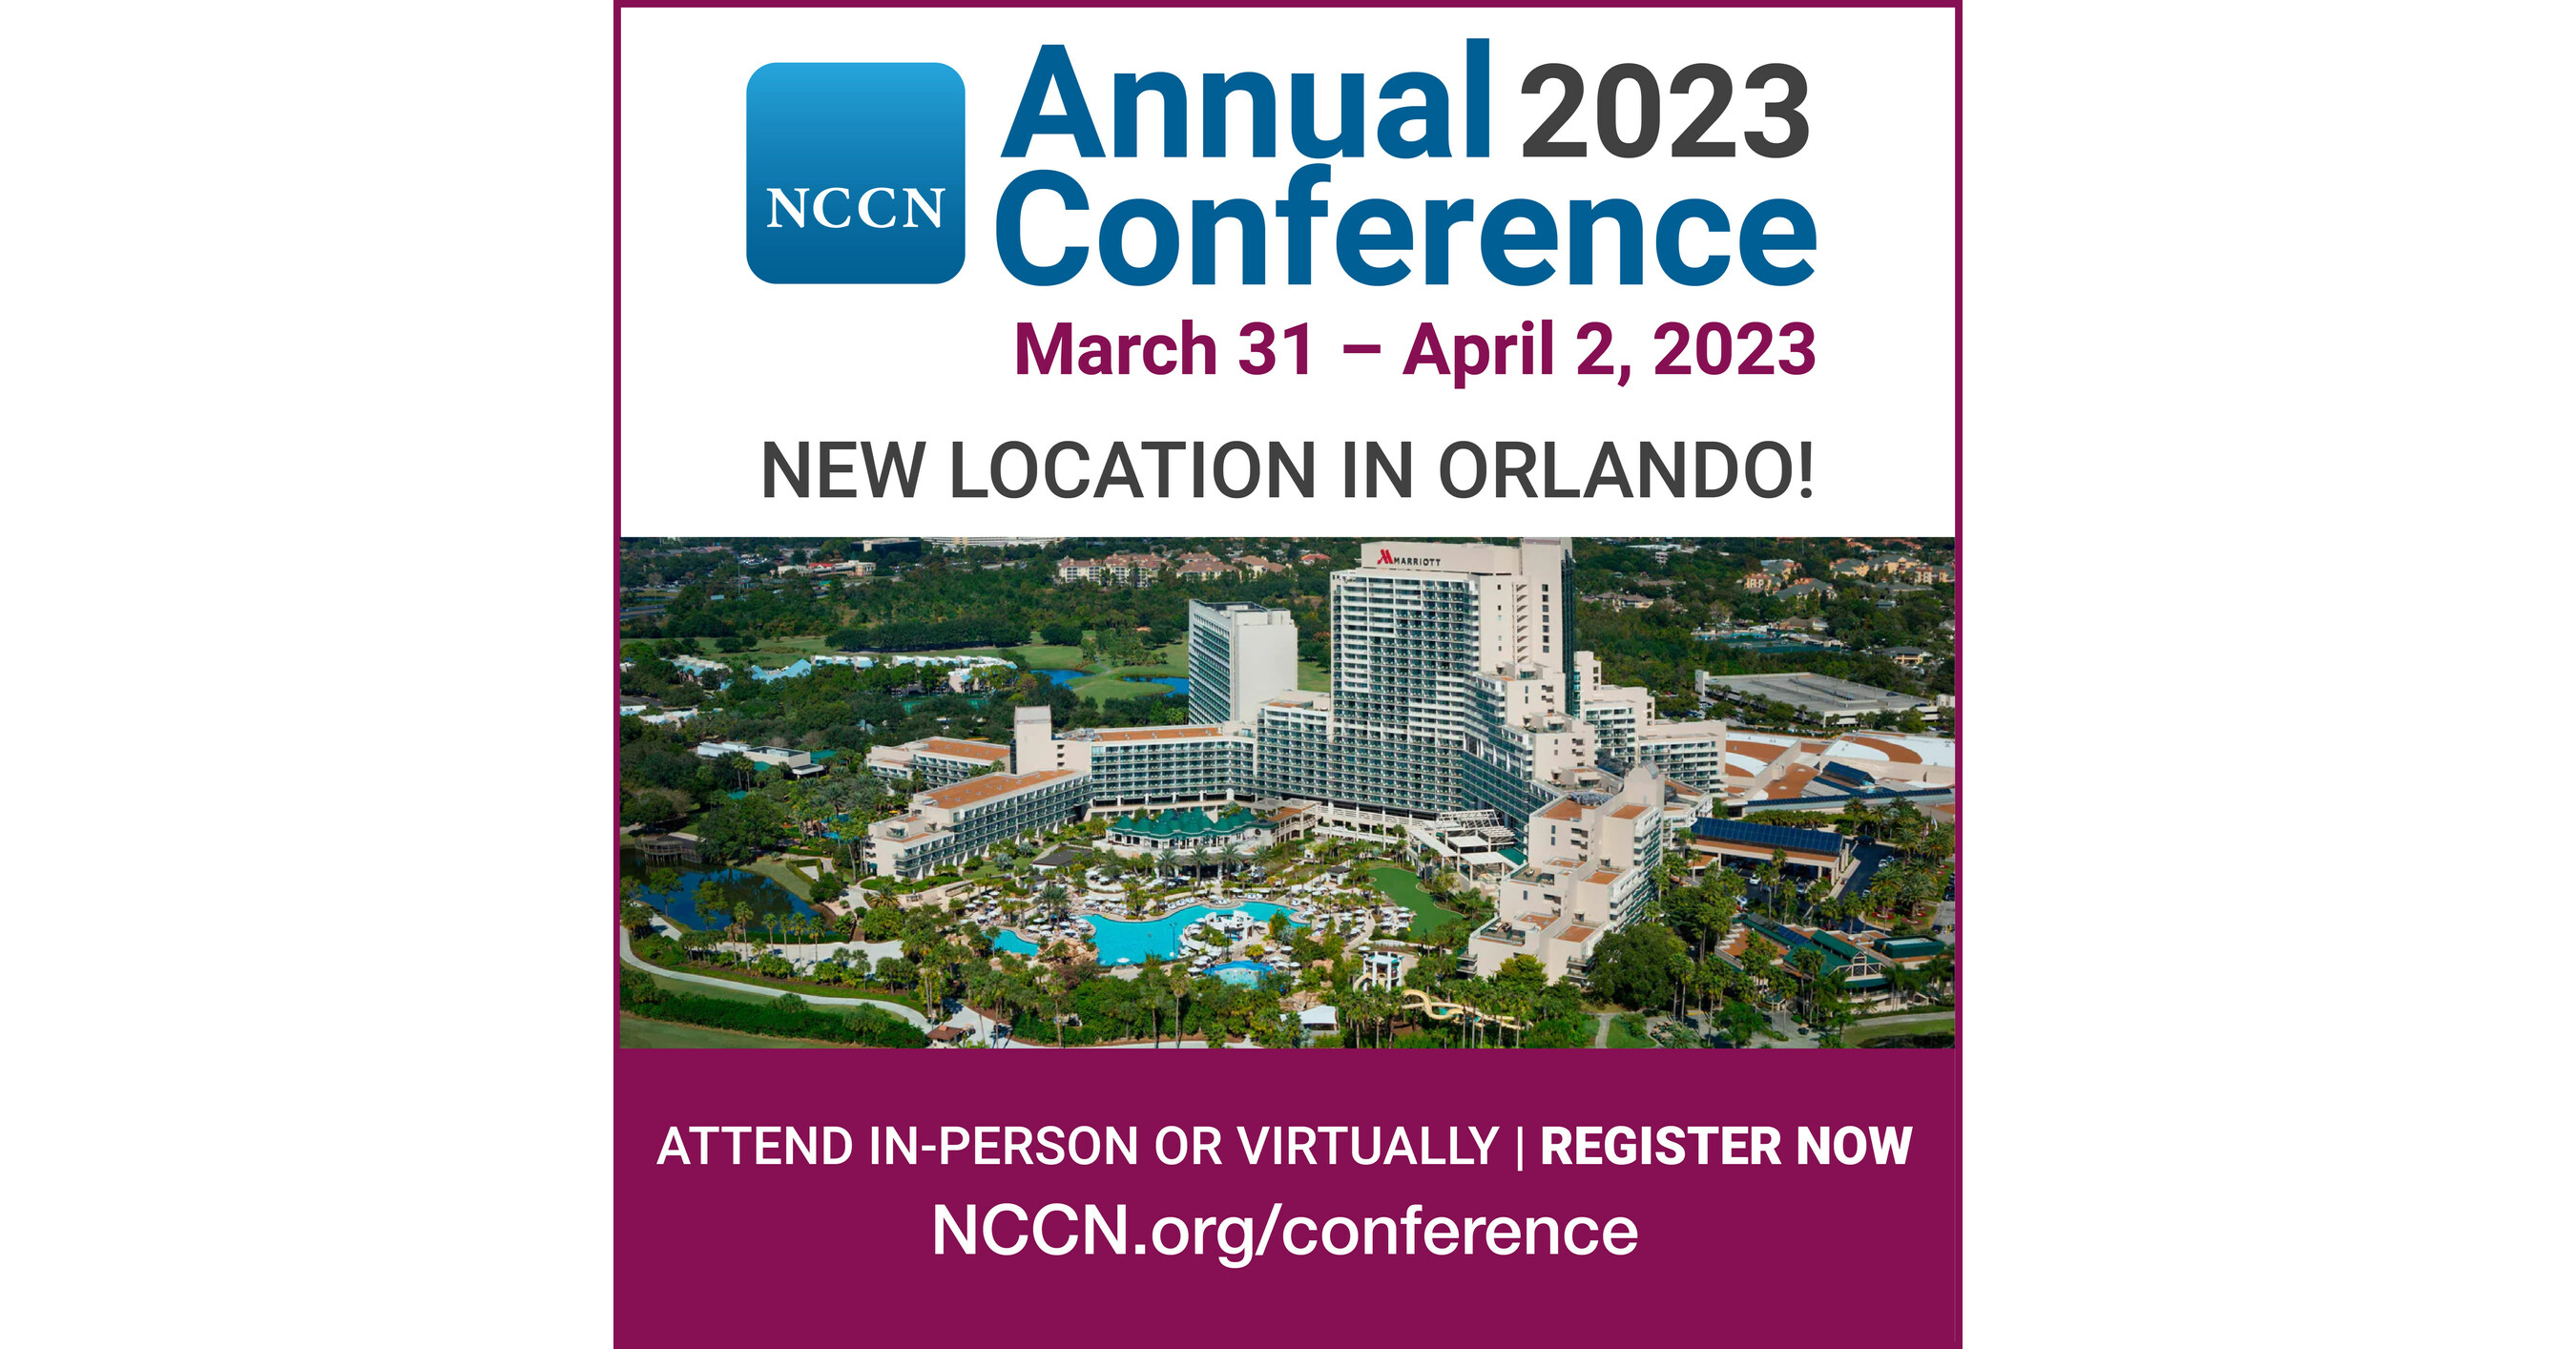 National Comprehensive Cancer Network Updates Annual Conference with